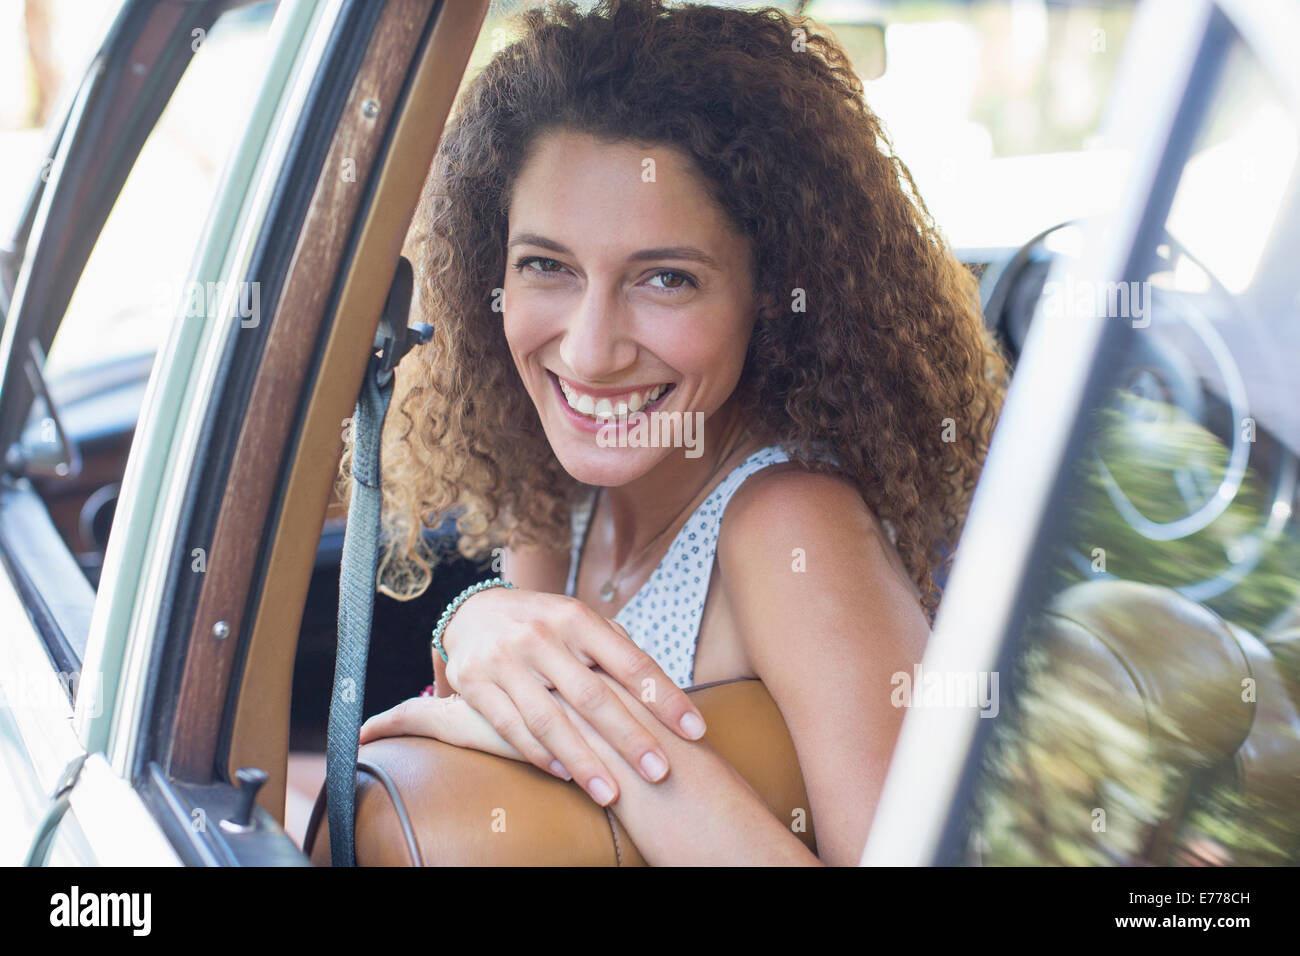 Woman riding in car on sunny day Stock Photo